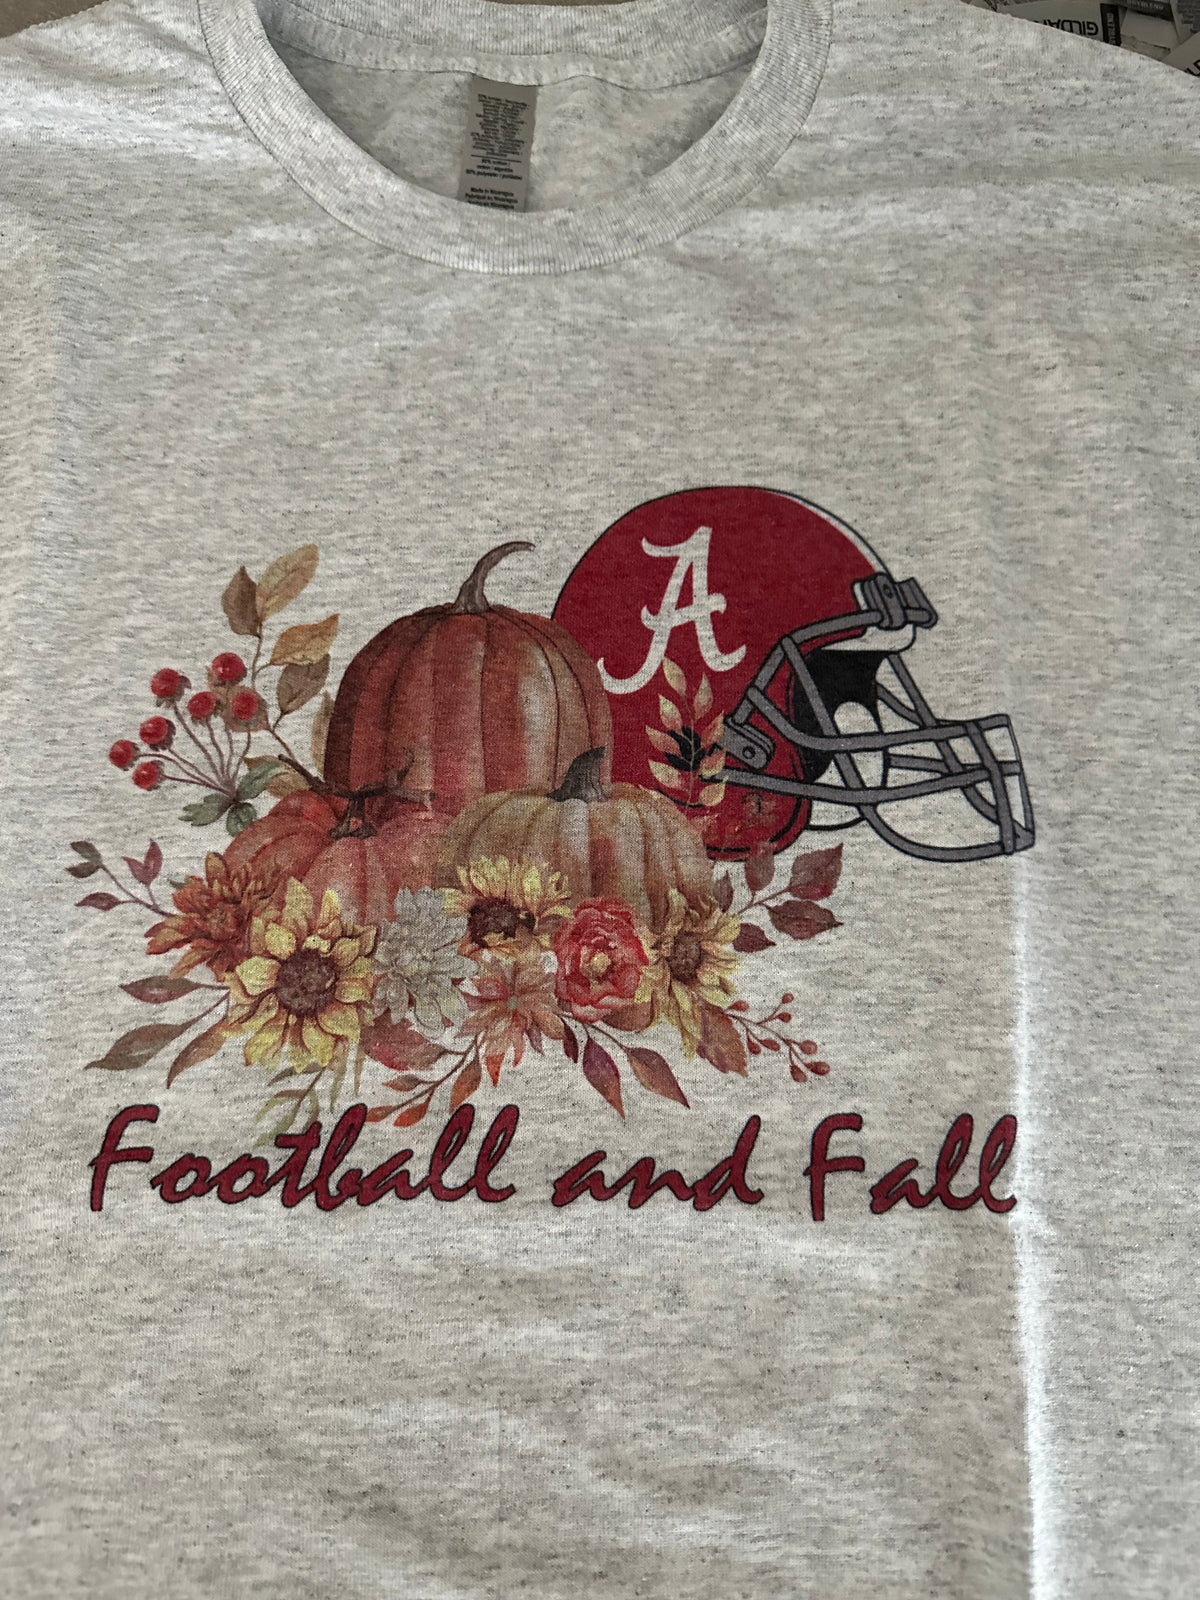 Bama Football and Fall Graphic Top